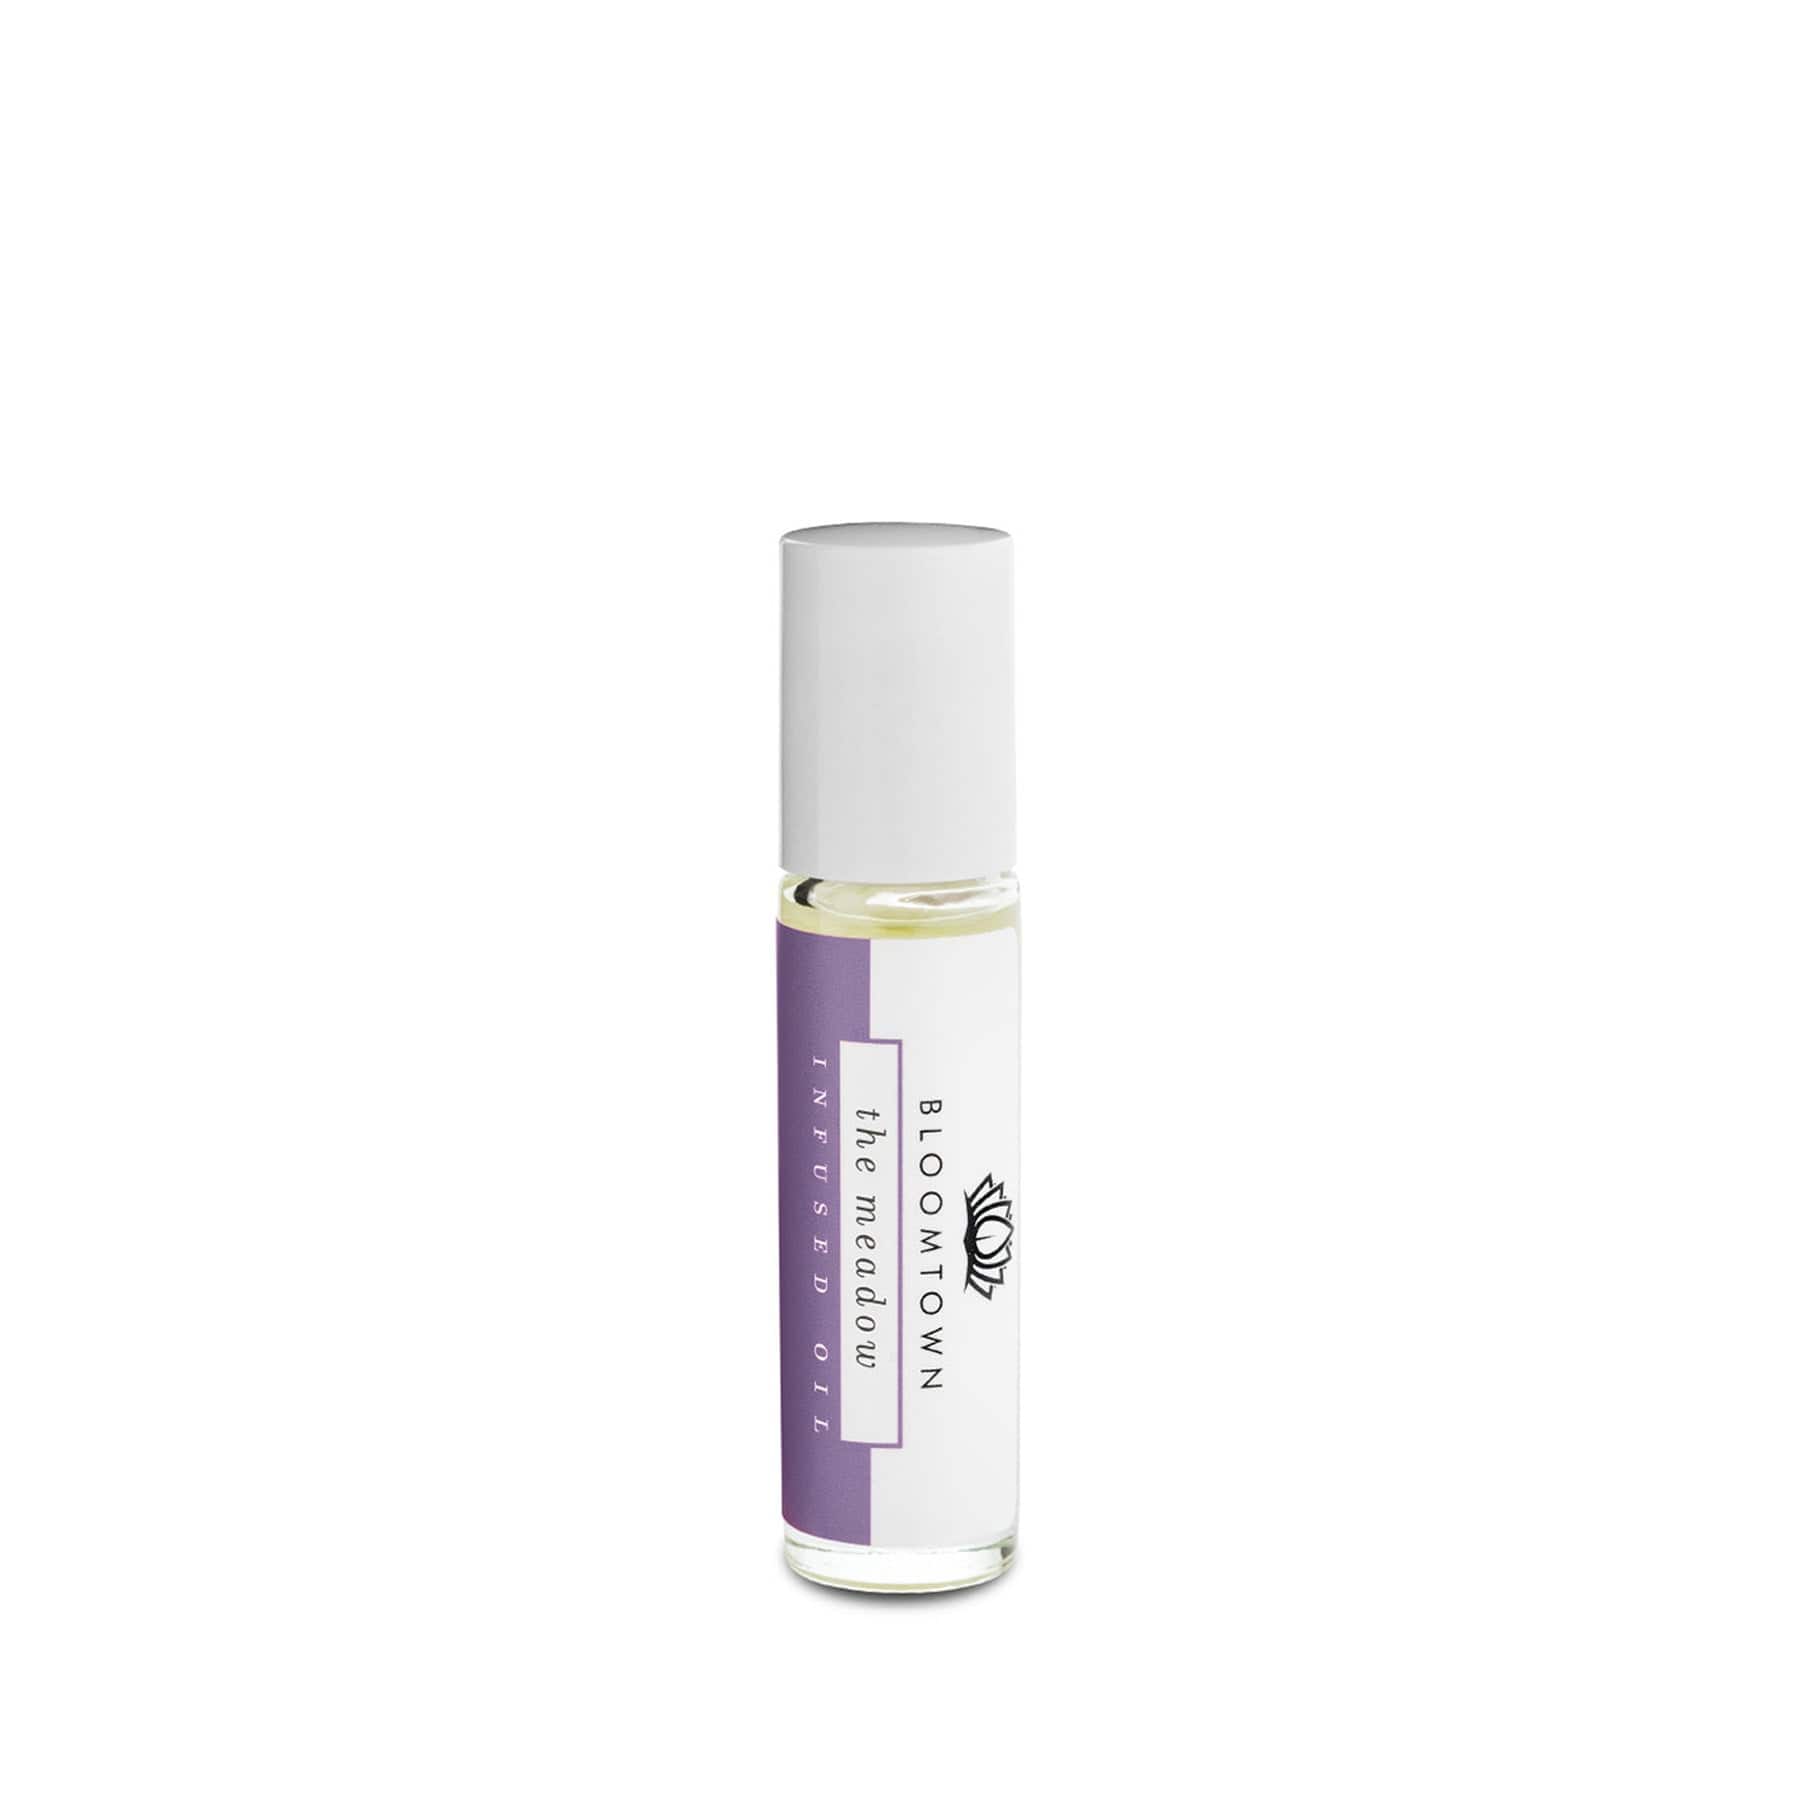 Essential oil roll-on bottle with white label and purple branding, isolated on white background.